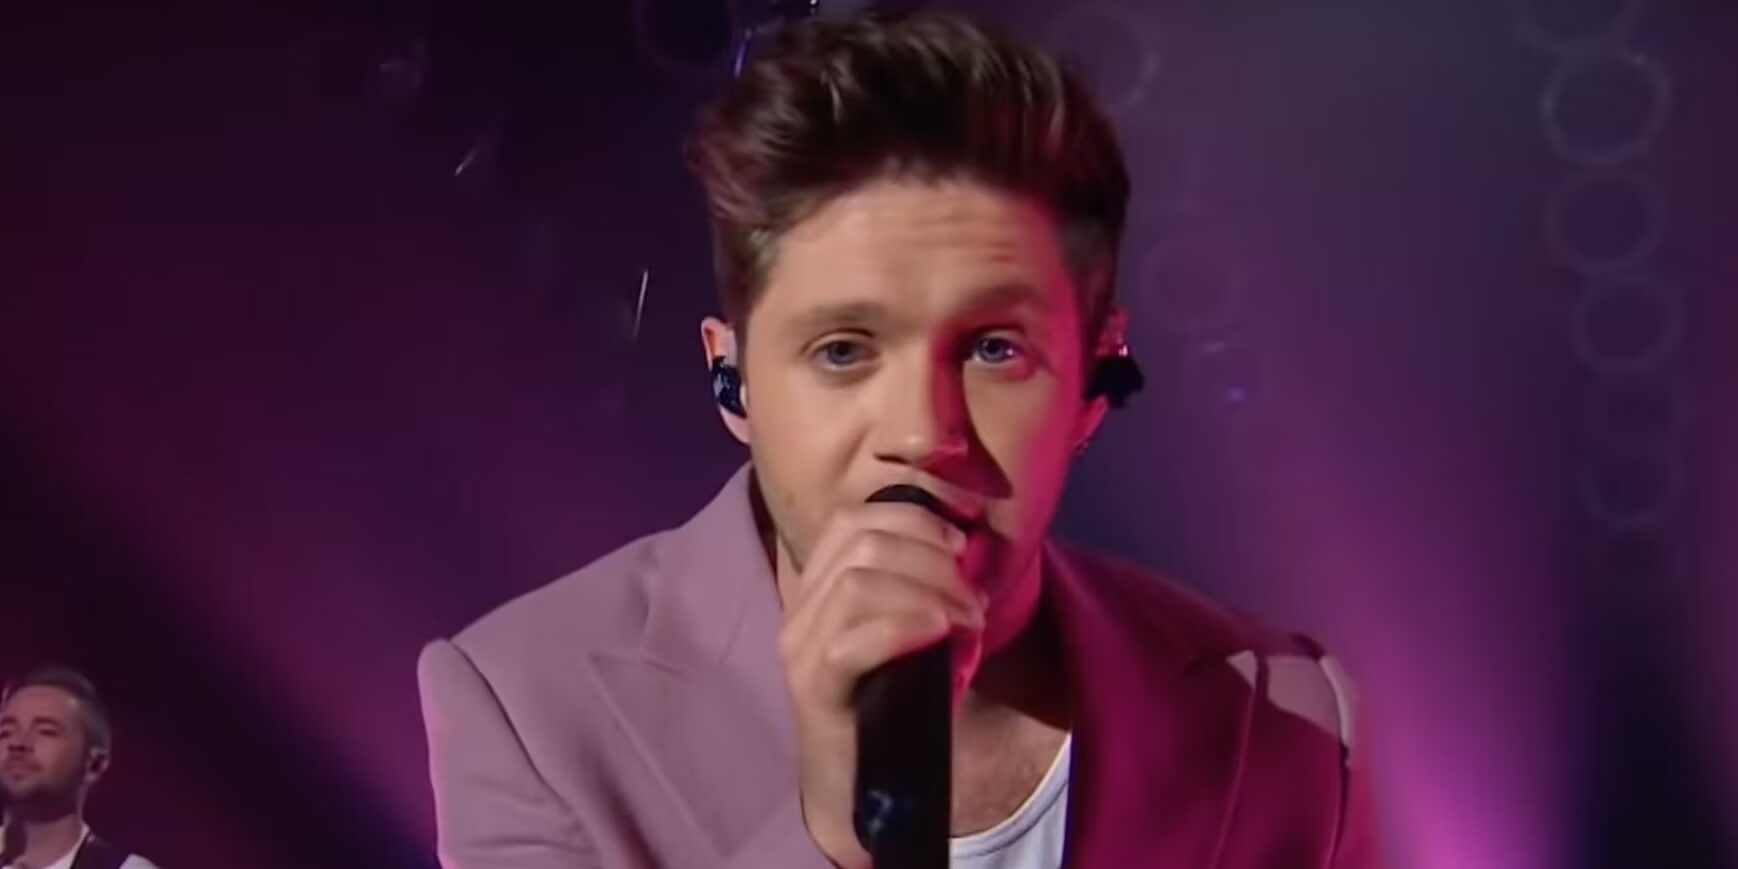 Who Is Niles On The Voice? (Actually, "Niall" From One Direction!)